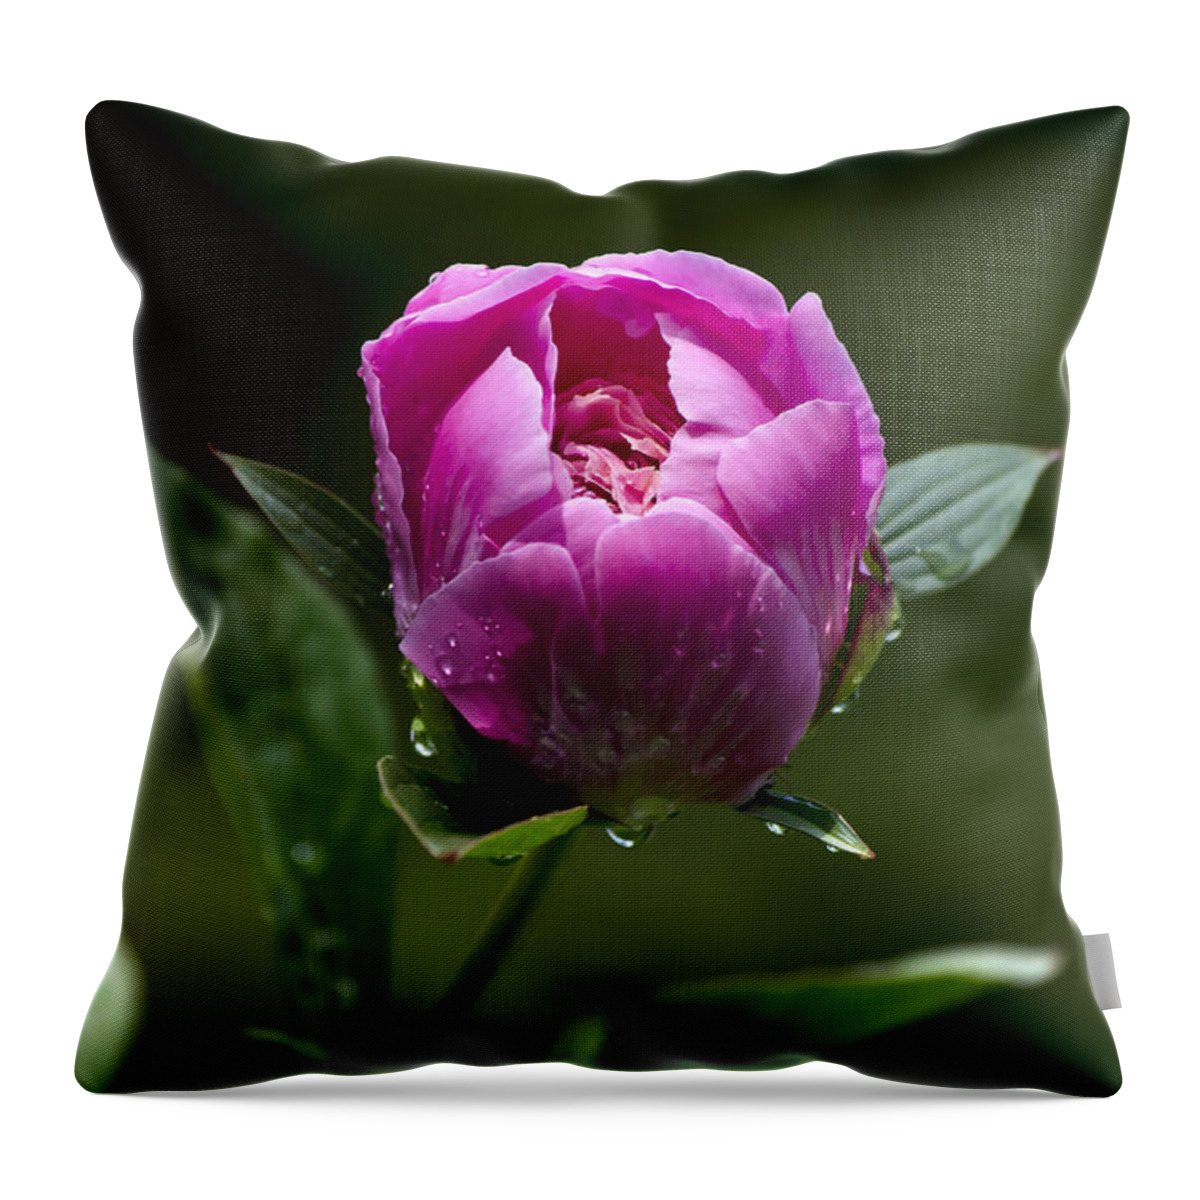 Flowers Throw Pillow featuring the photograph Pink Peony Flower by Christina Rollo